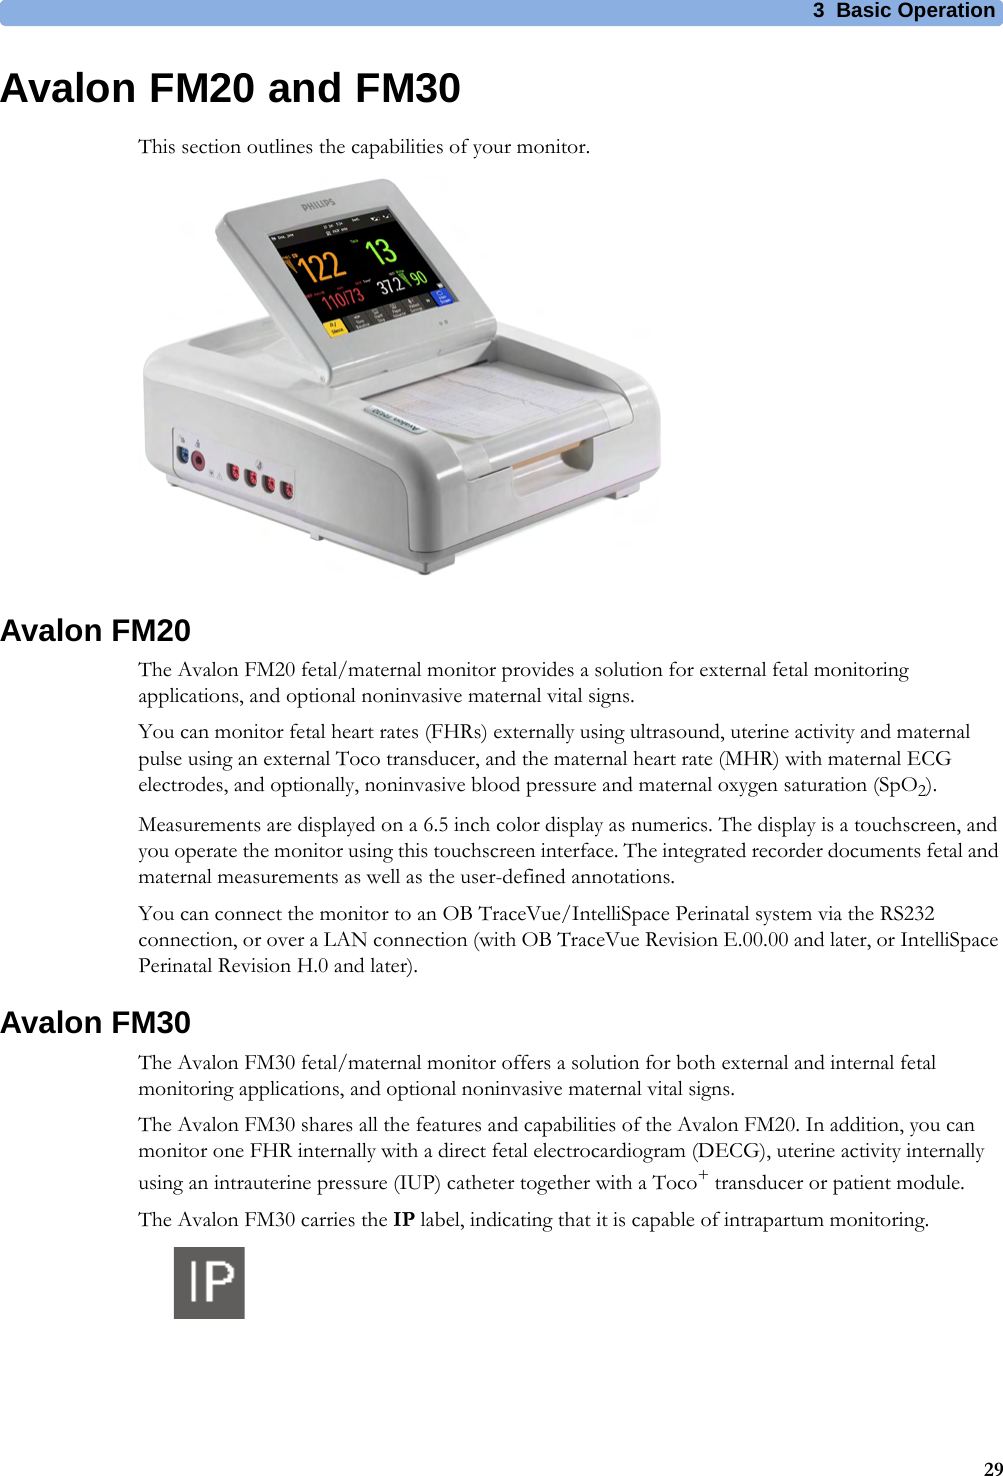 3  Basic Operation29Avalon FM20 and FM30This section outlines the capabilities of your monitor.Avalon FM20The Avalon FM20 fetal/maternal monitor provides a solution for external fetal monitoring applications, and optional noninvasive maternal vital signs.You can monitor fetal heart rates (FHRs) externally using ultrasound, uterine activity and maternal pulse using an external Toco transducer, and the maternal heart rate (MHR) with maternal ECG electrodes, and optionally, noninvasive blood pressure and maternal oxygen saturation (SpO2).Measurements are displayed on a 6.5 inch color display as numerics. The display is a touchscreen, and you operate the monitor using this touchscreen interface. The integrated recorder documents fetal and maternal measurements as well as the user-defined annotations.You can connect the monitor to an OB TraceVue/IntelliSpace Perinatal system via the RS232 connection, or over a LAN connection (with OB TraceVue Revision E.00.00 and later, or IntelliSpace Perinatal Revision H.0 and later).Avalon FM30The Avalon FM30 fetal/maternal monitor offers a solution for both external and internal fetal monitoring applications, and optional noninvasive maternal vital signs.The Avalon FM30 shares all the features and capabilities of the Avalon FM20. In addition, you can monitor one FHR internally with a direct fetal electrocardiogram (DECG), uterine activity internally using an intrauterine pressure (IUP) catheter together with a Toco+ transducer or patient module.The Avalon FM30 carries the IP label, indicating that it is capable of intrapartum monitoring.